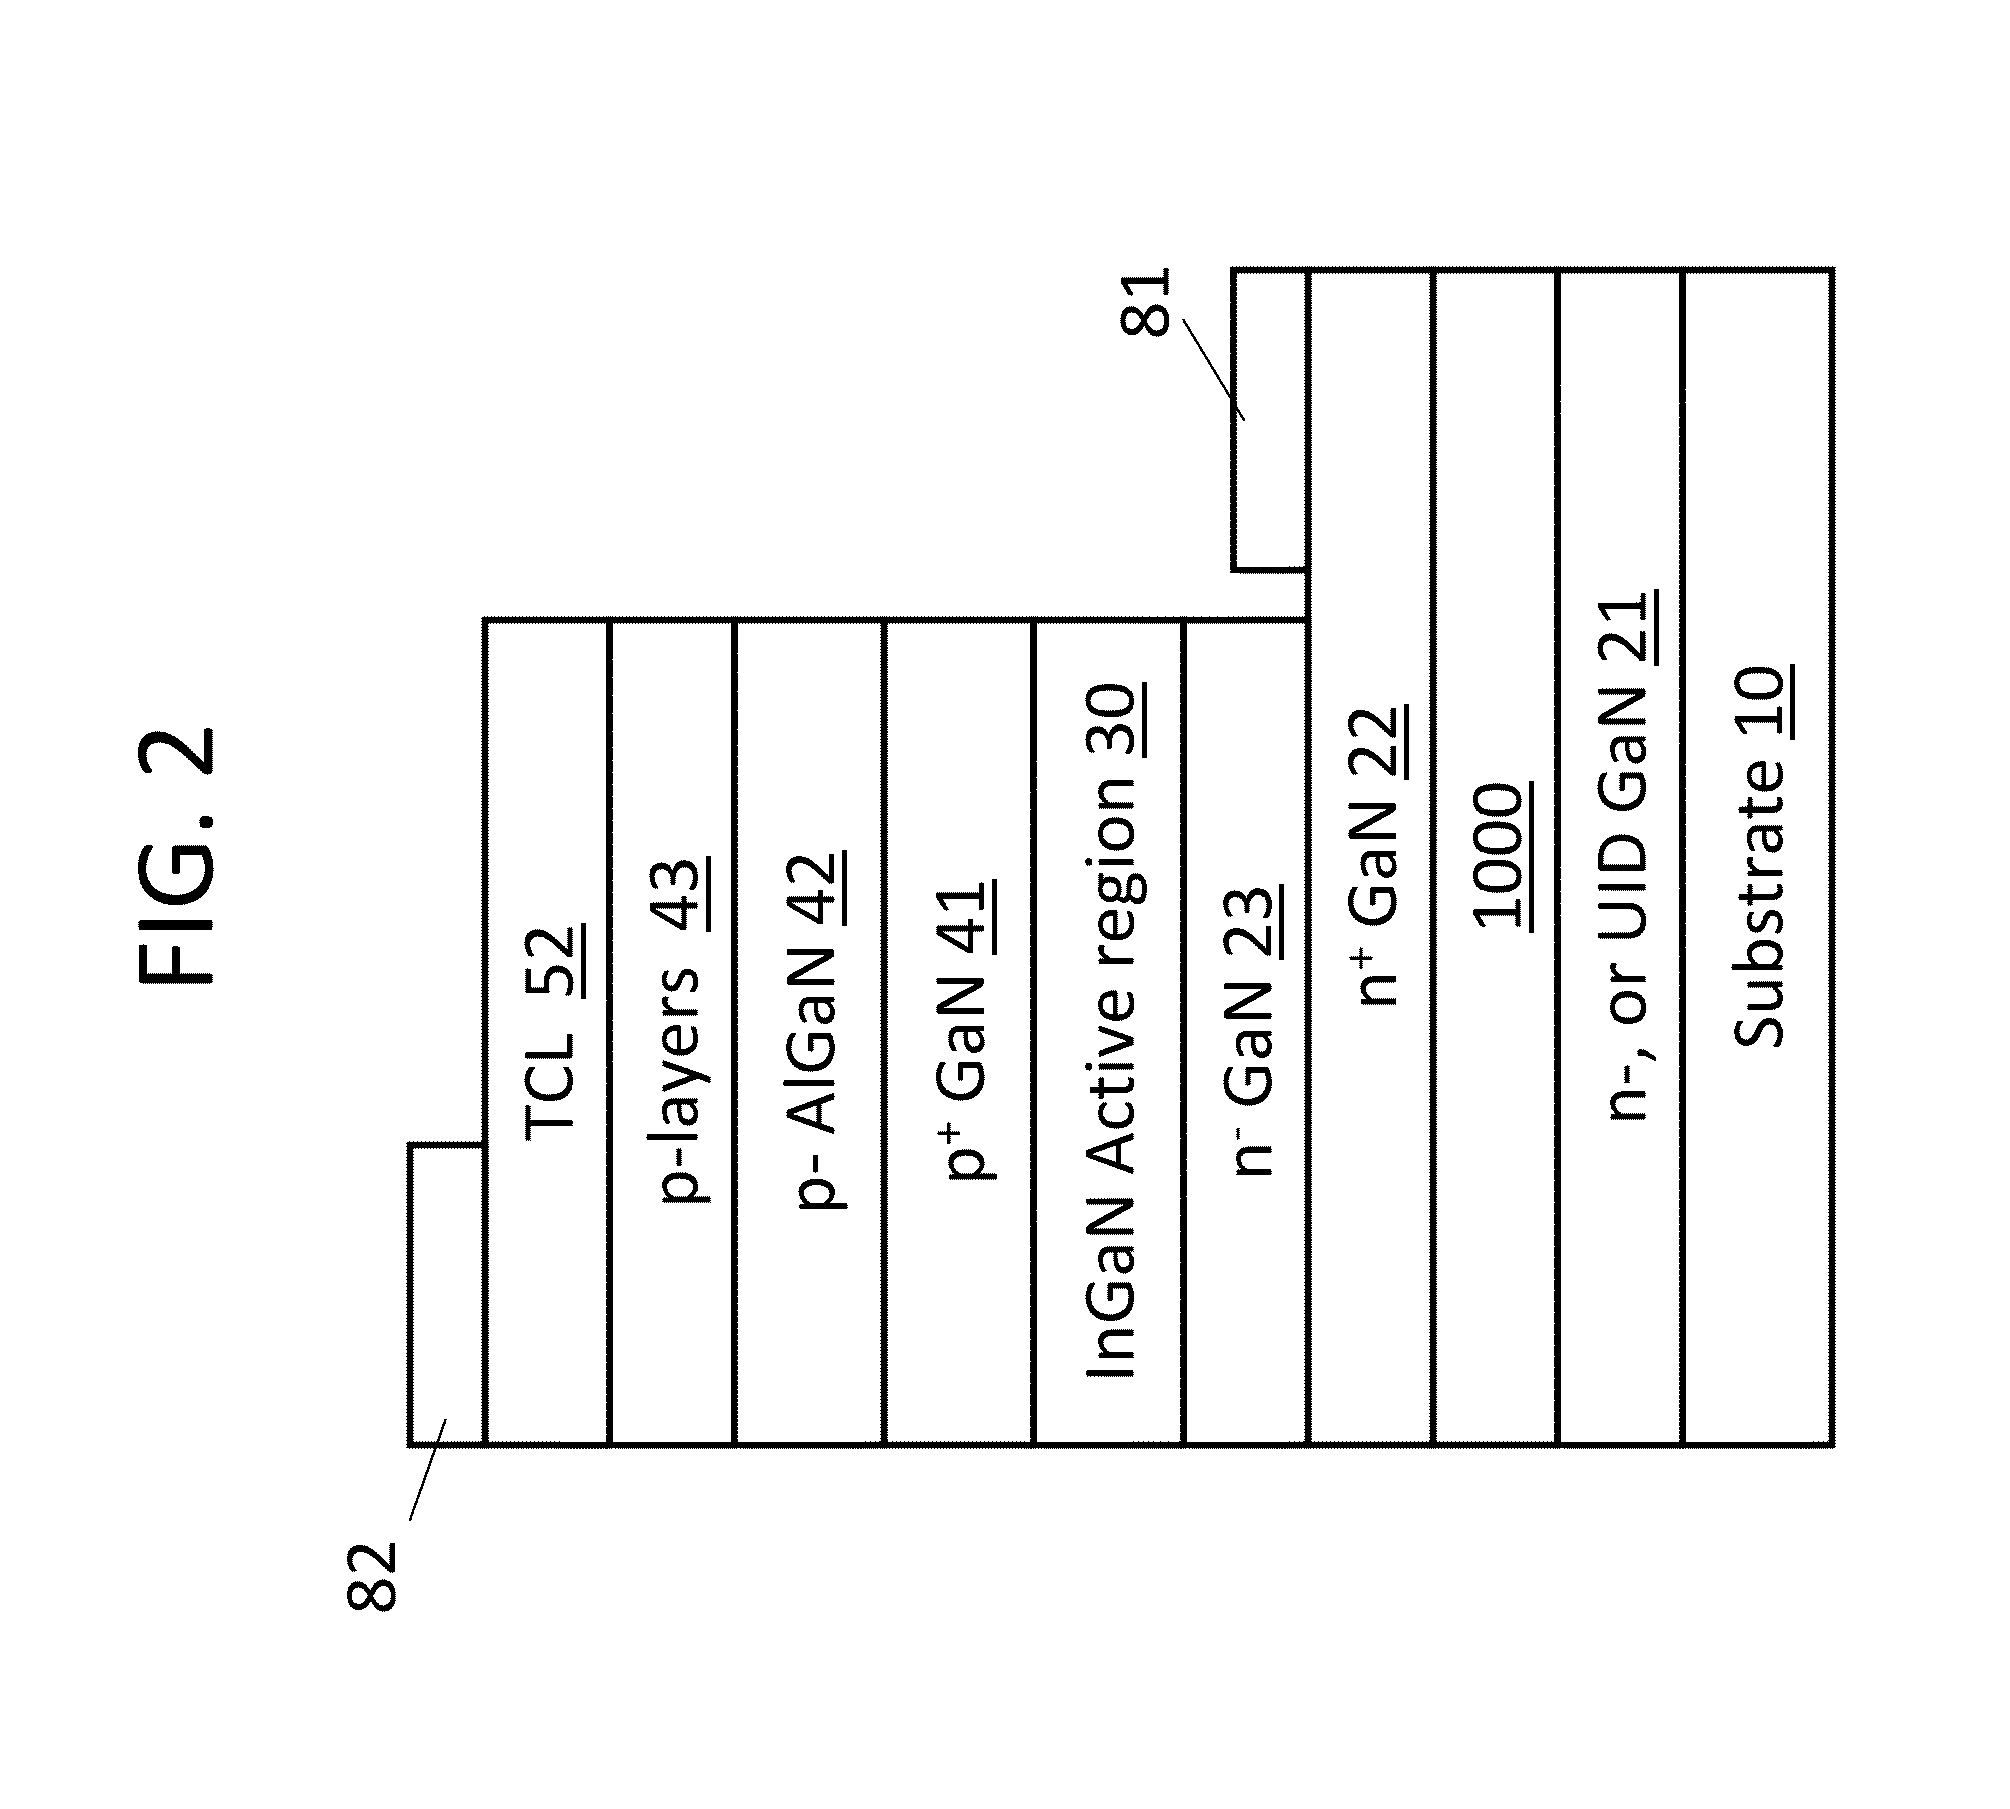 Lighting-emitting device with nanostructured layer and method for fabricating the same